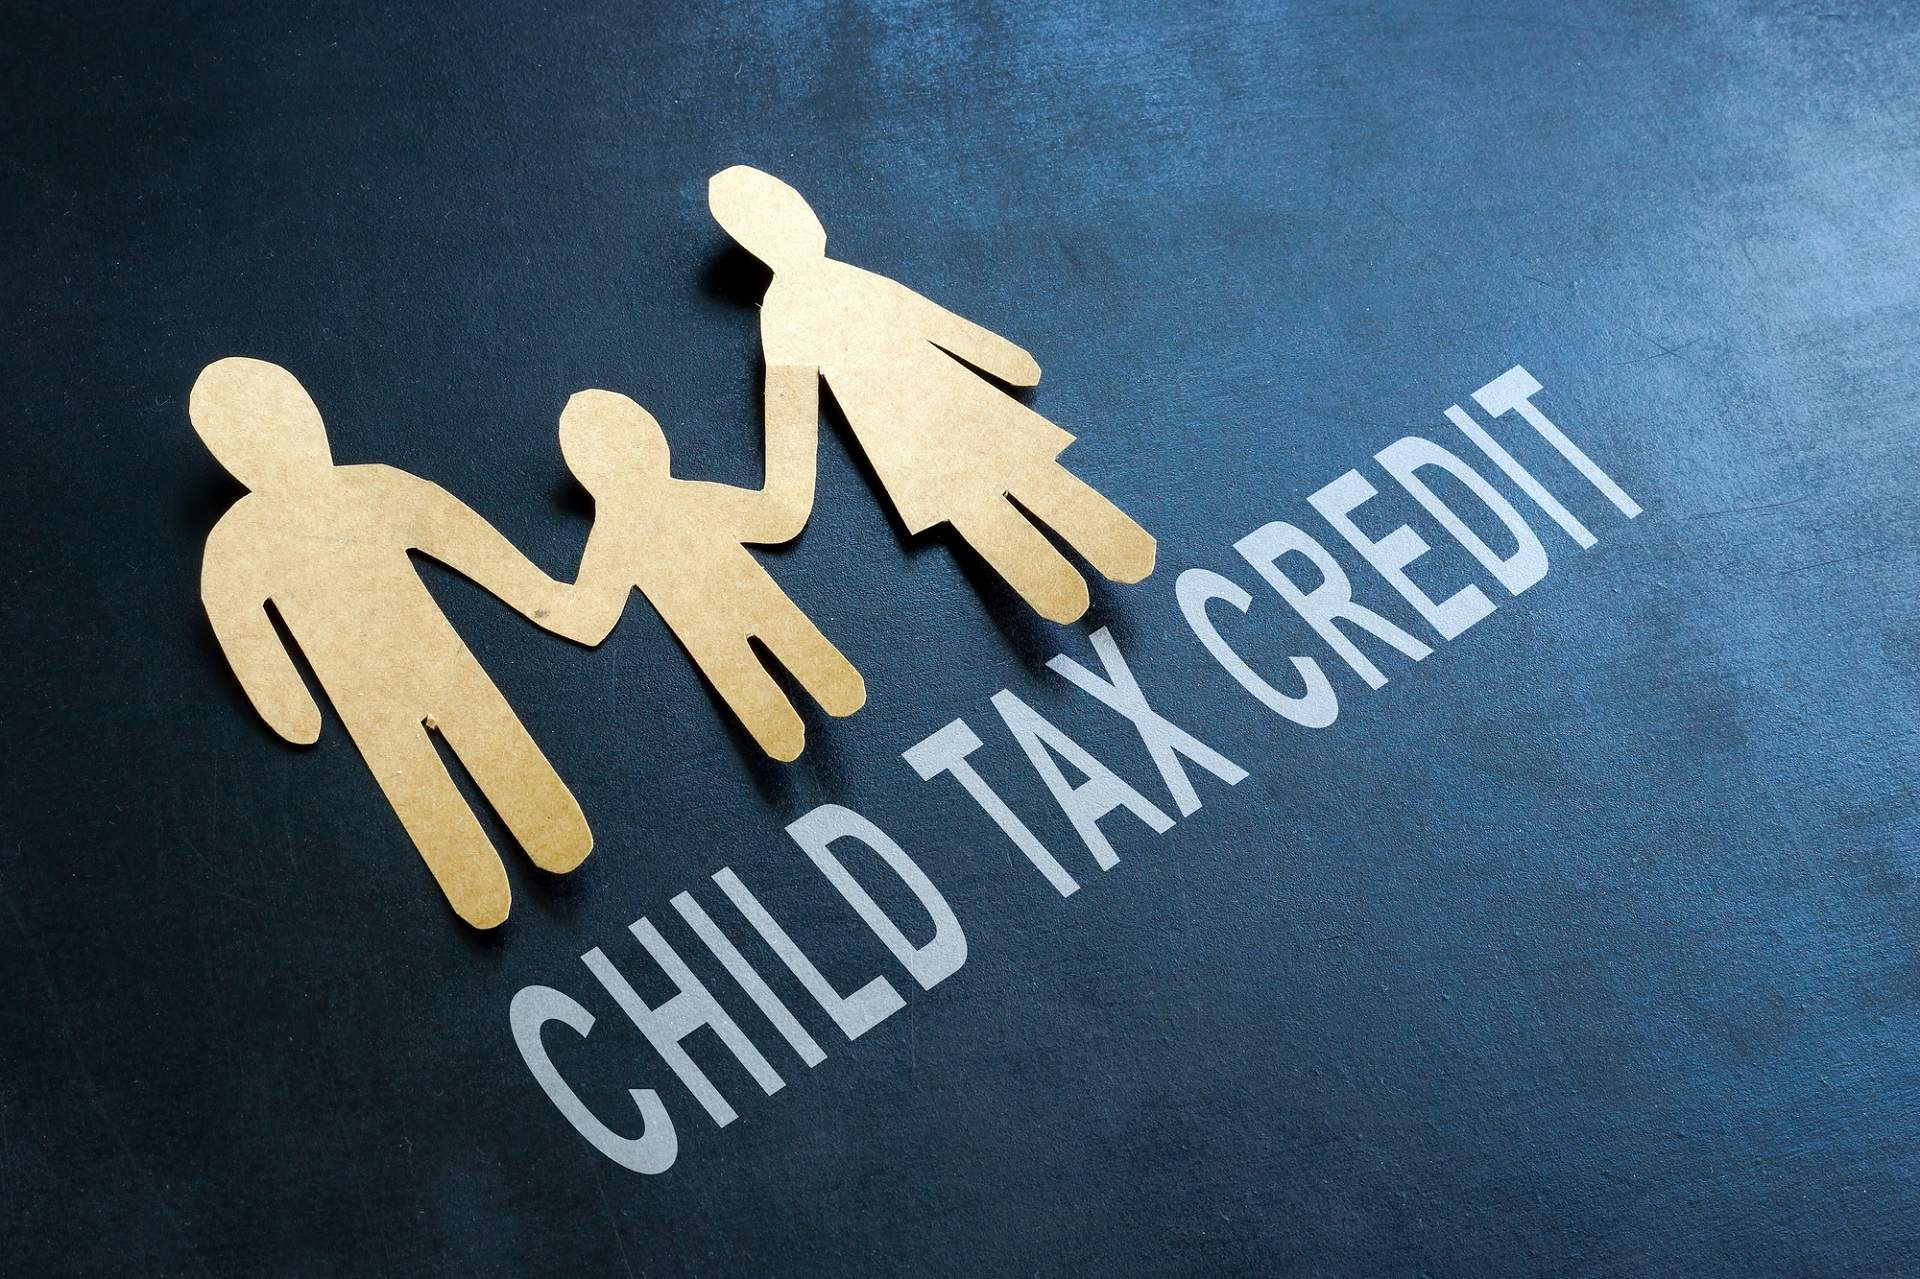 expanded-ctc-no-longer-available-you-can-still-claim-2-000-in-child